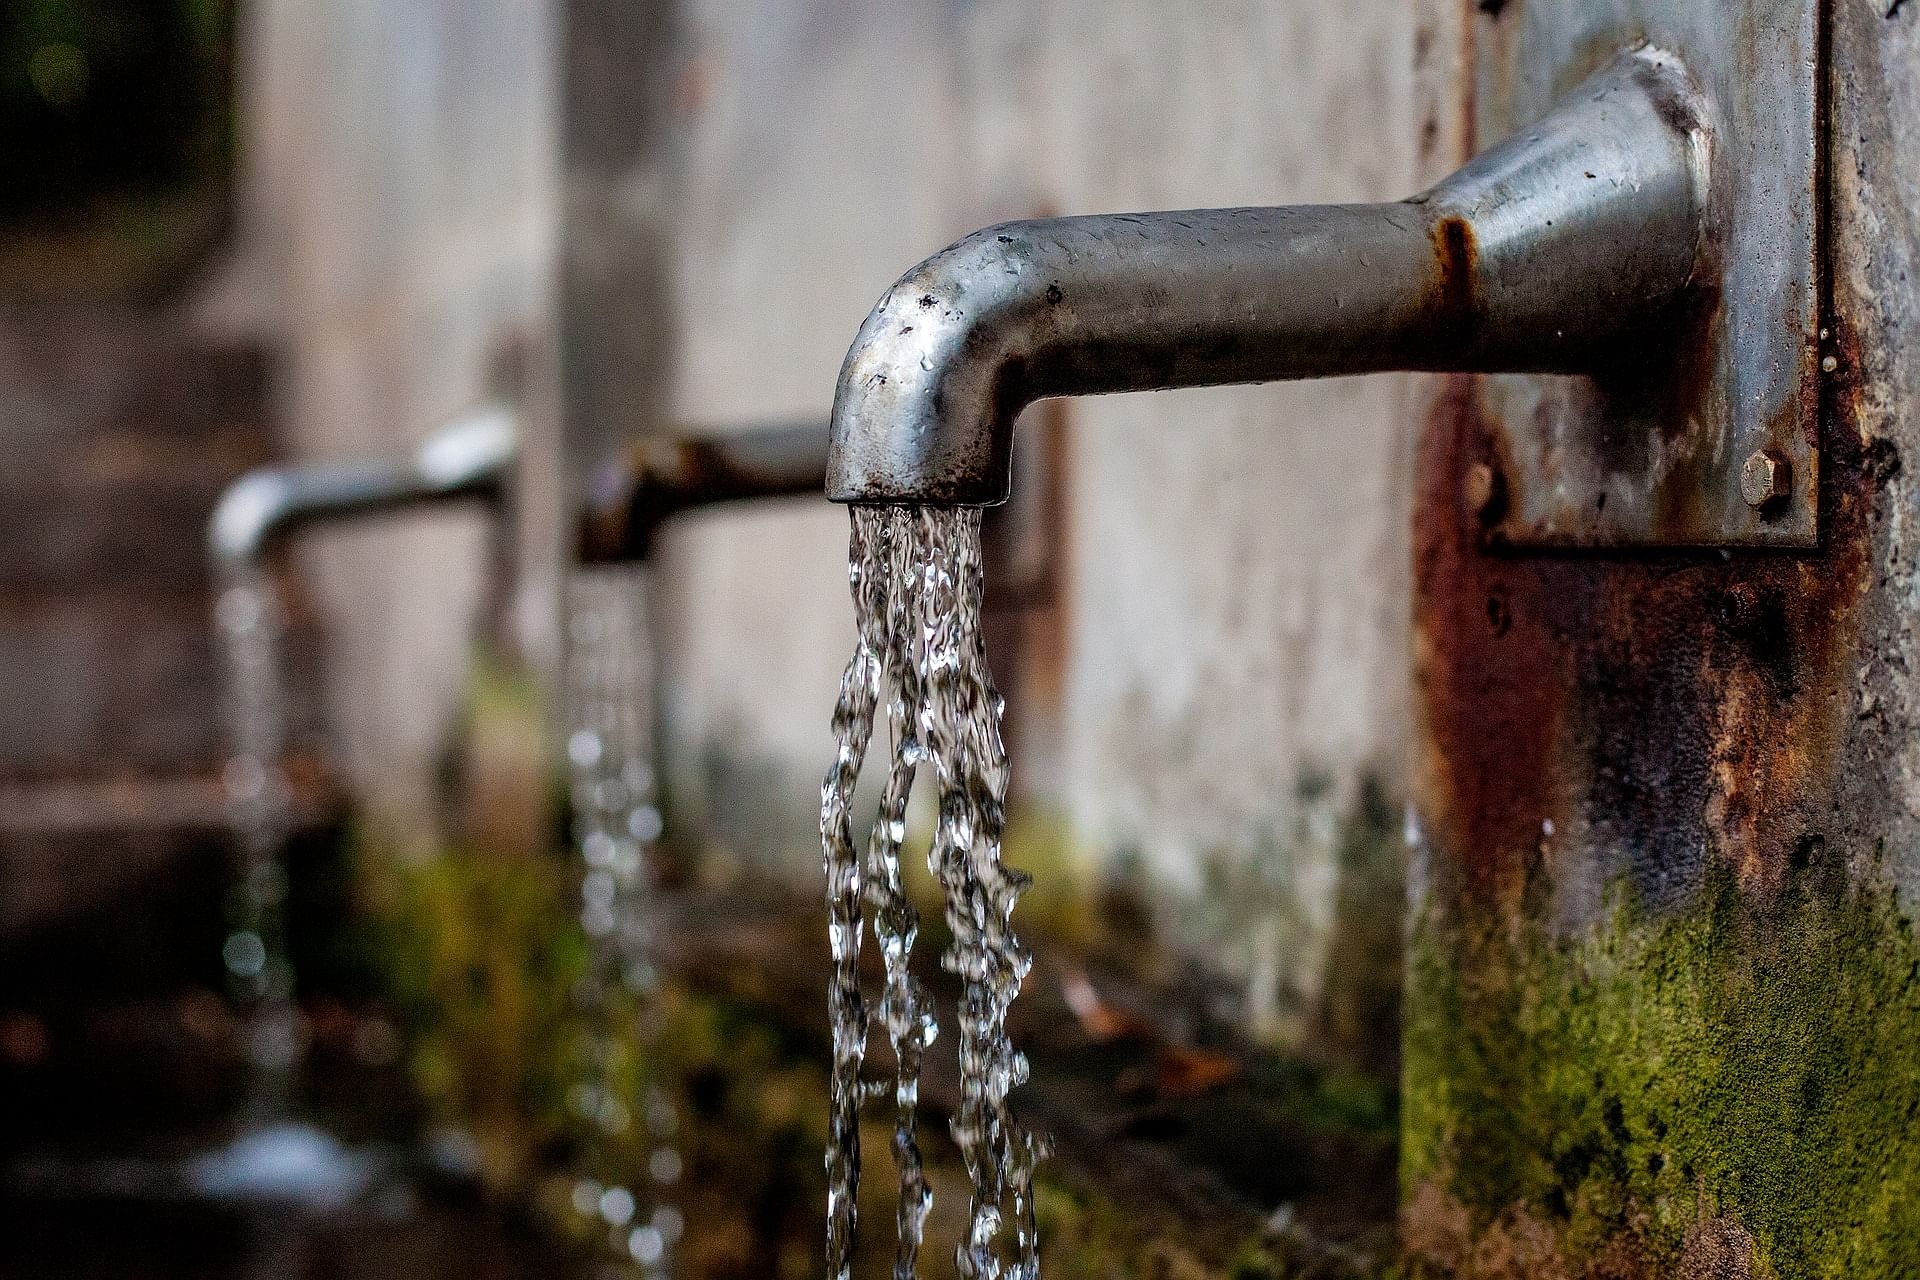 Most residents rely on the basic method of boiling water because of the pathetic condition of the tap water supply. Representative Image/Pixabay